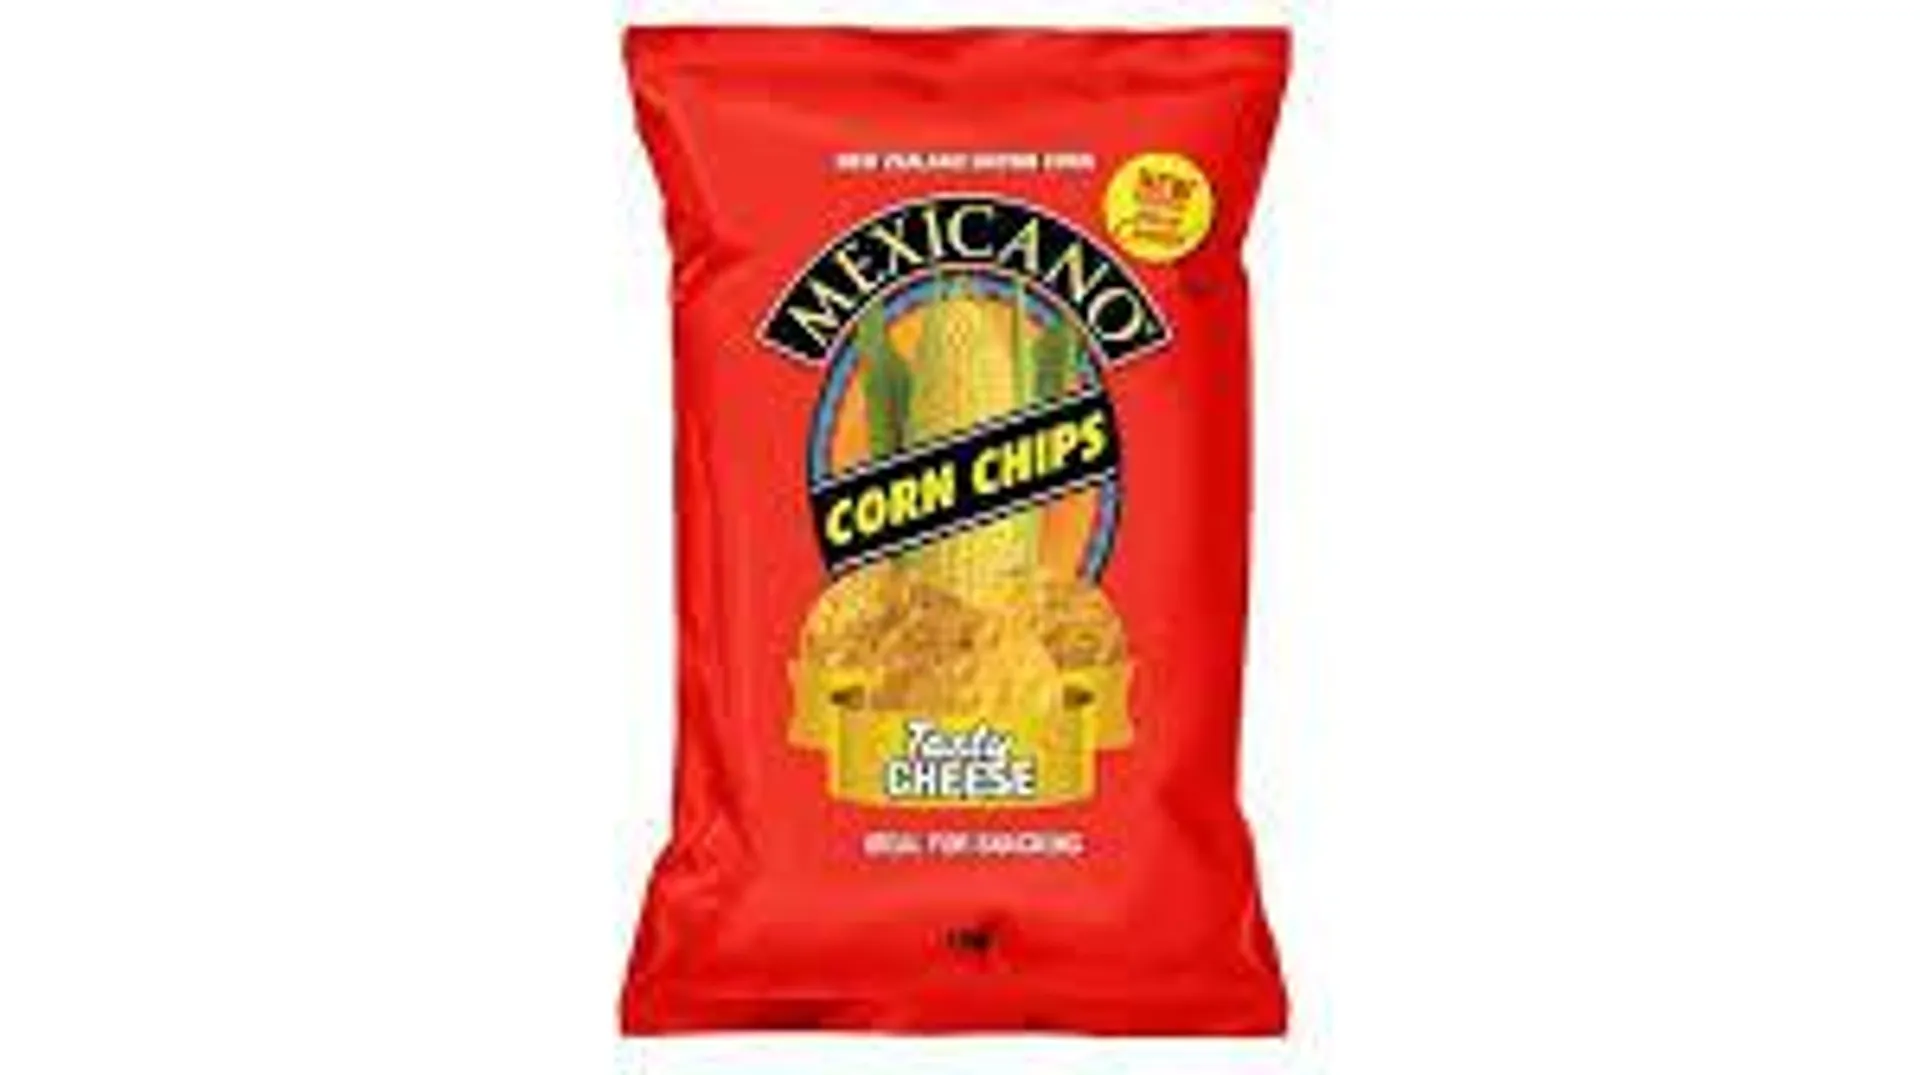 MEXICANO CORN CHIPS TASTY CHEESE